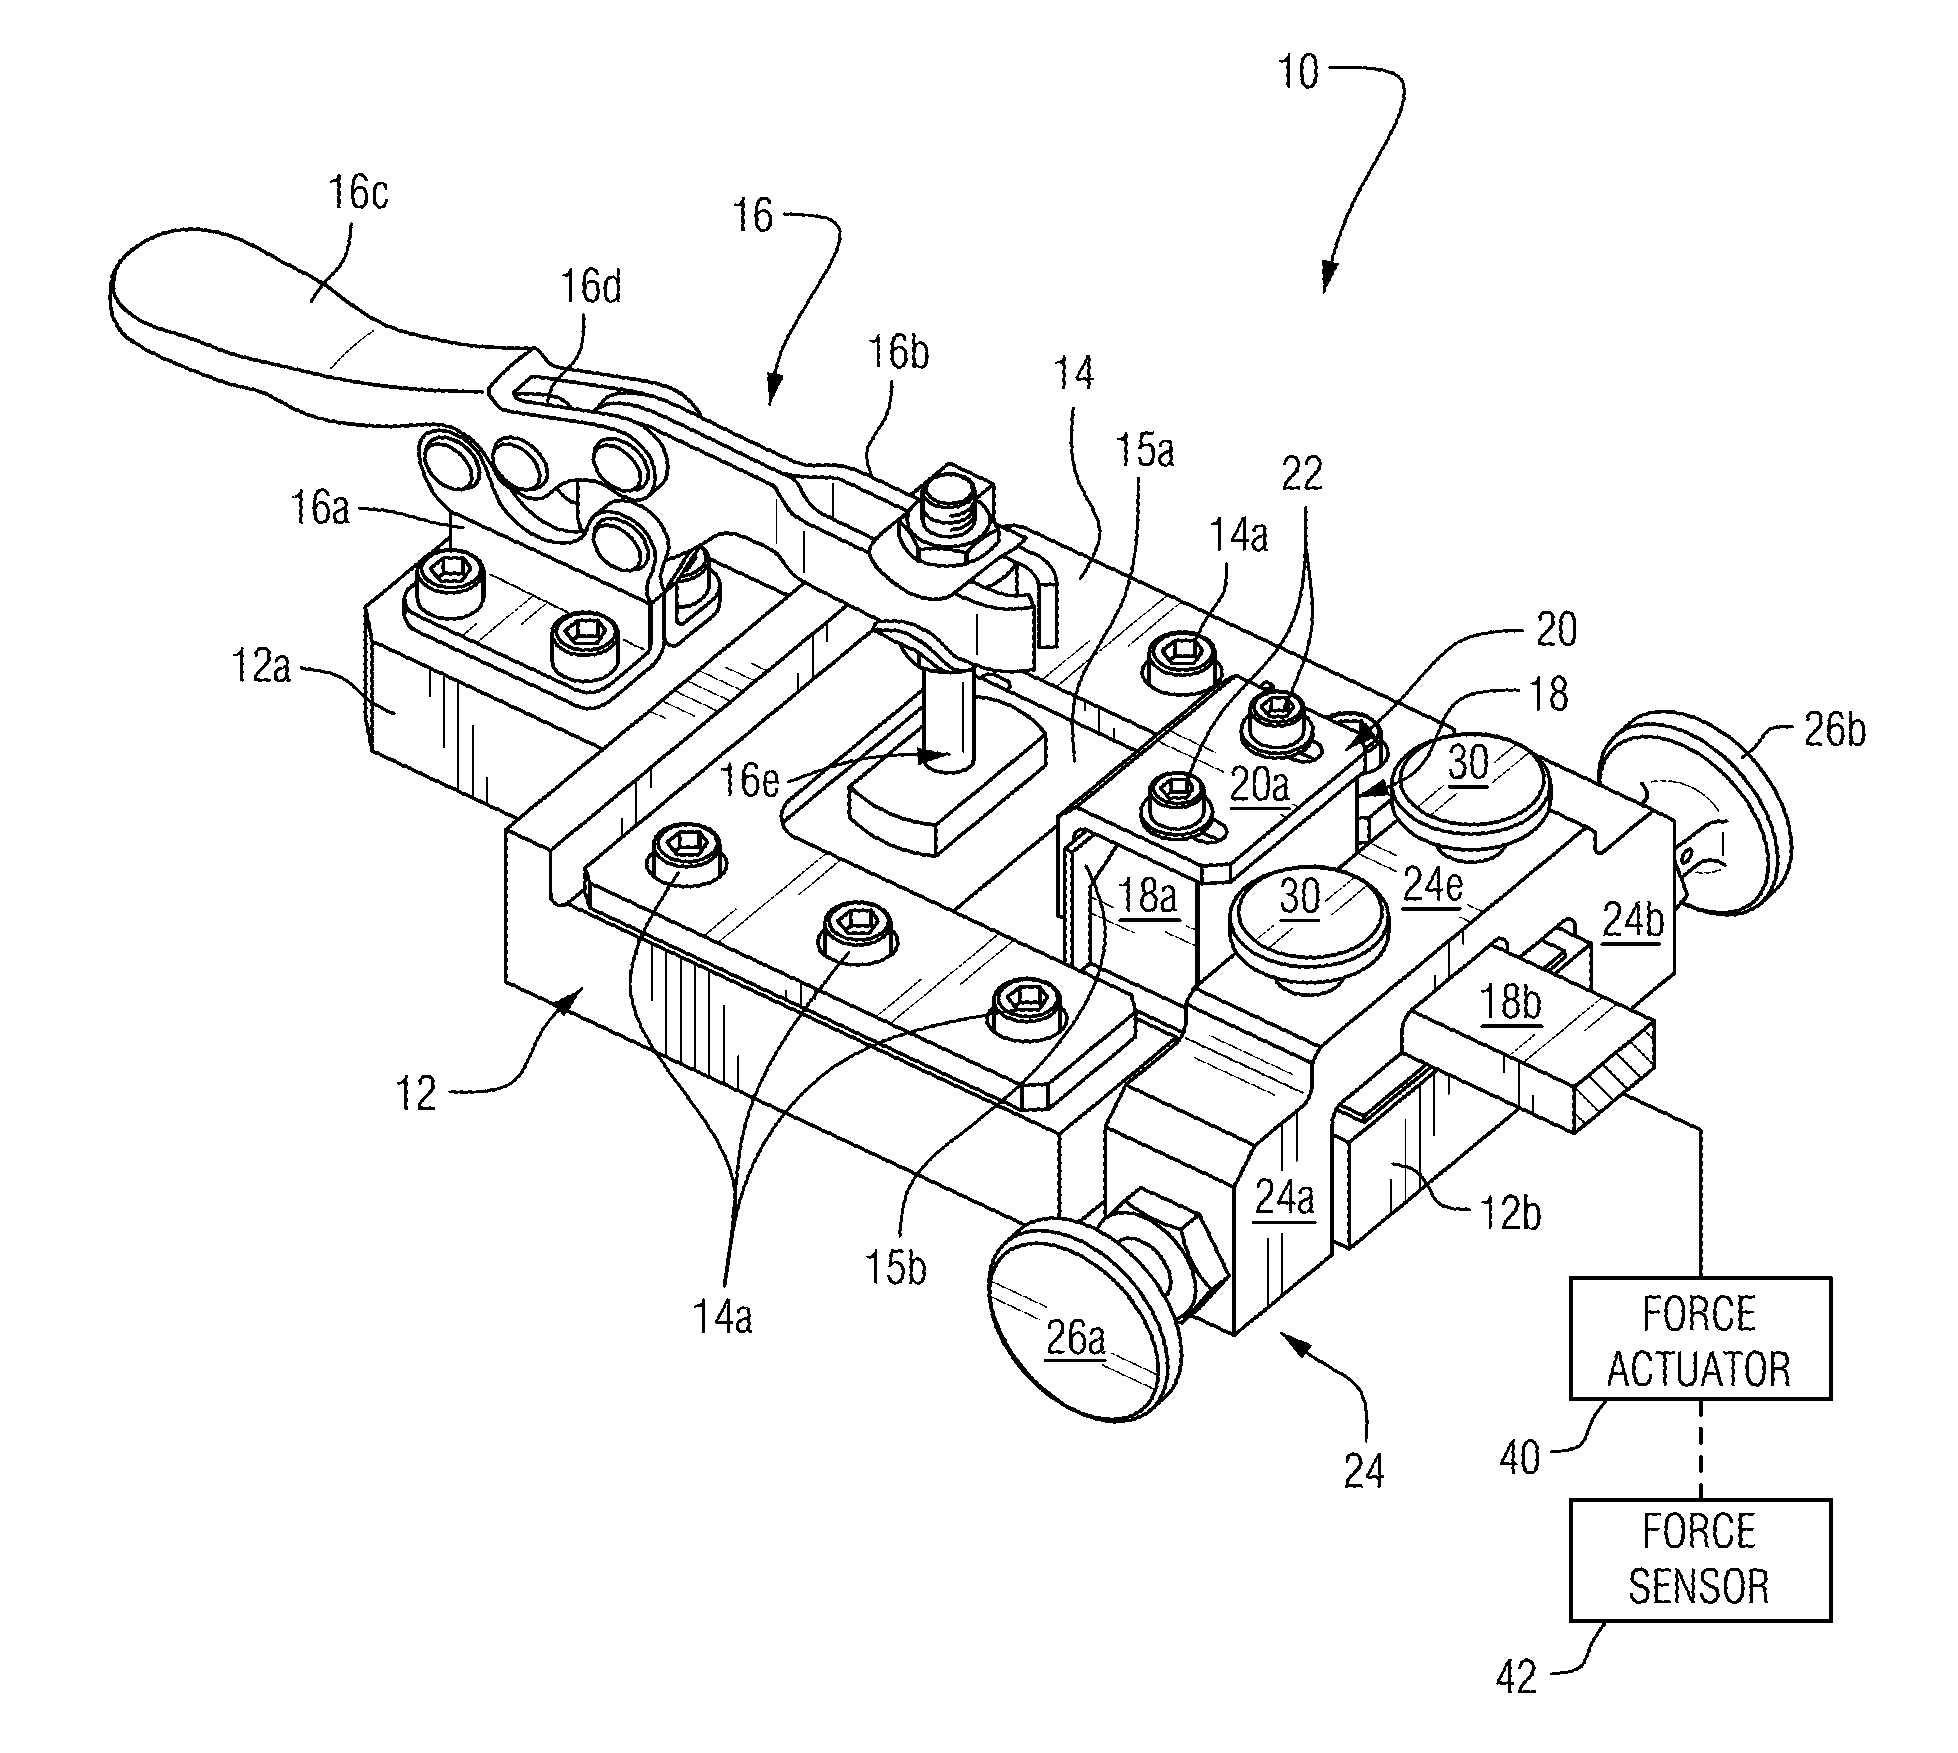 Device and methods for testing quality of welding joints